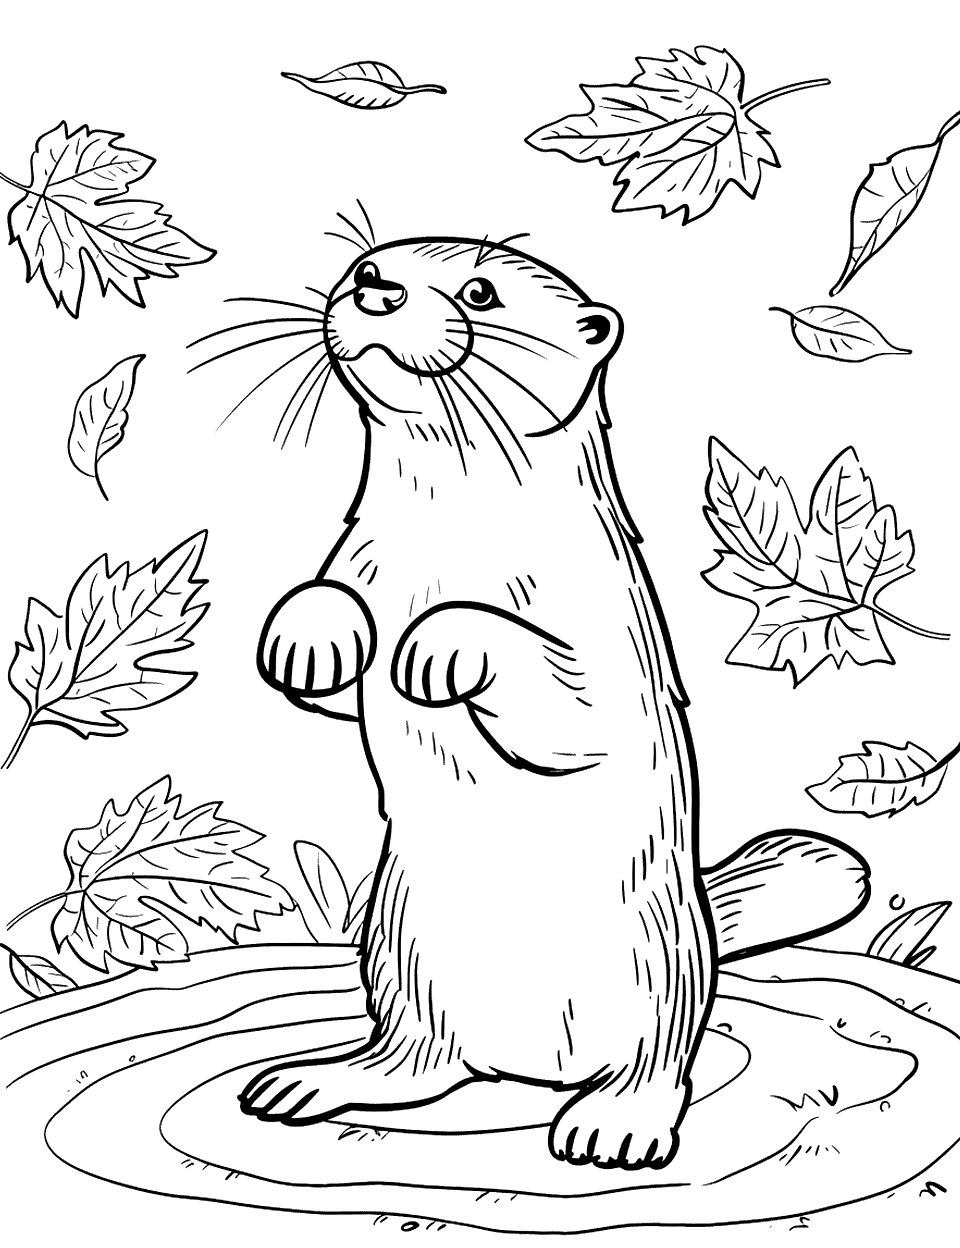 Otter Playing with Autumn Leaves Coloring Page - An otter playing with crisp autumn leaves.